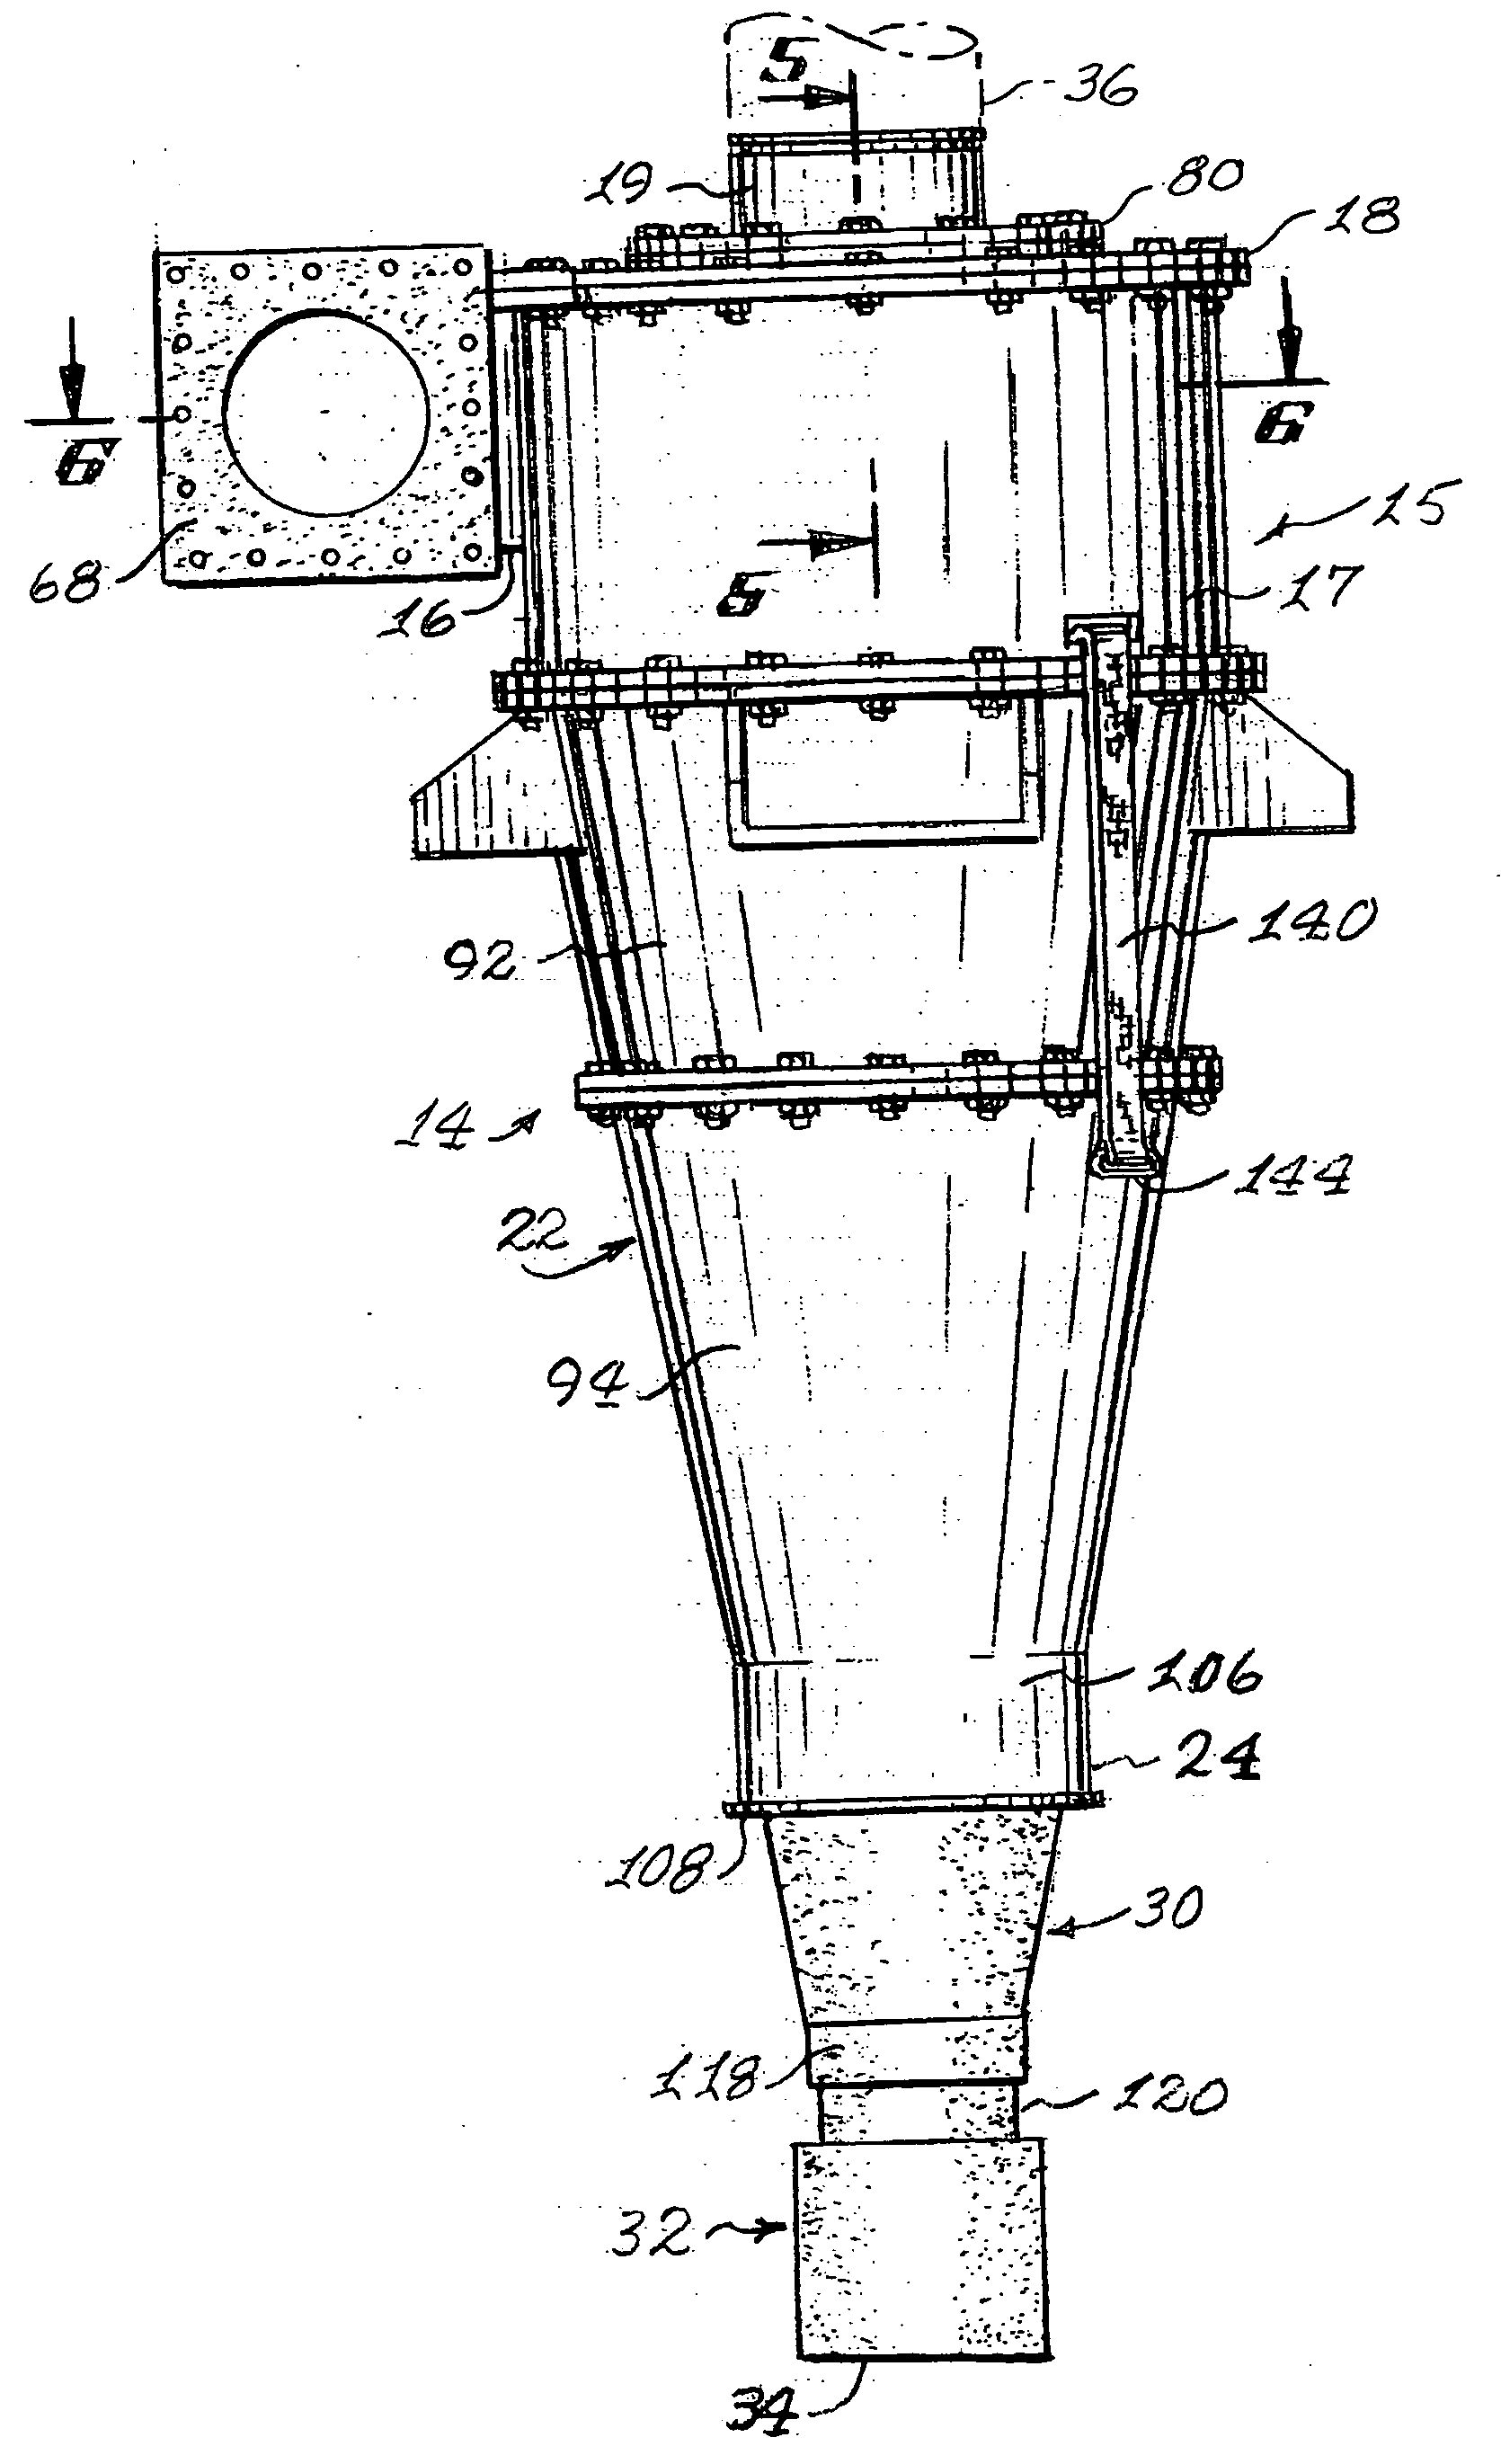 Cyclone with in-situ replaceable liner system and method for accomplishing same